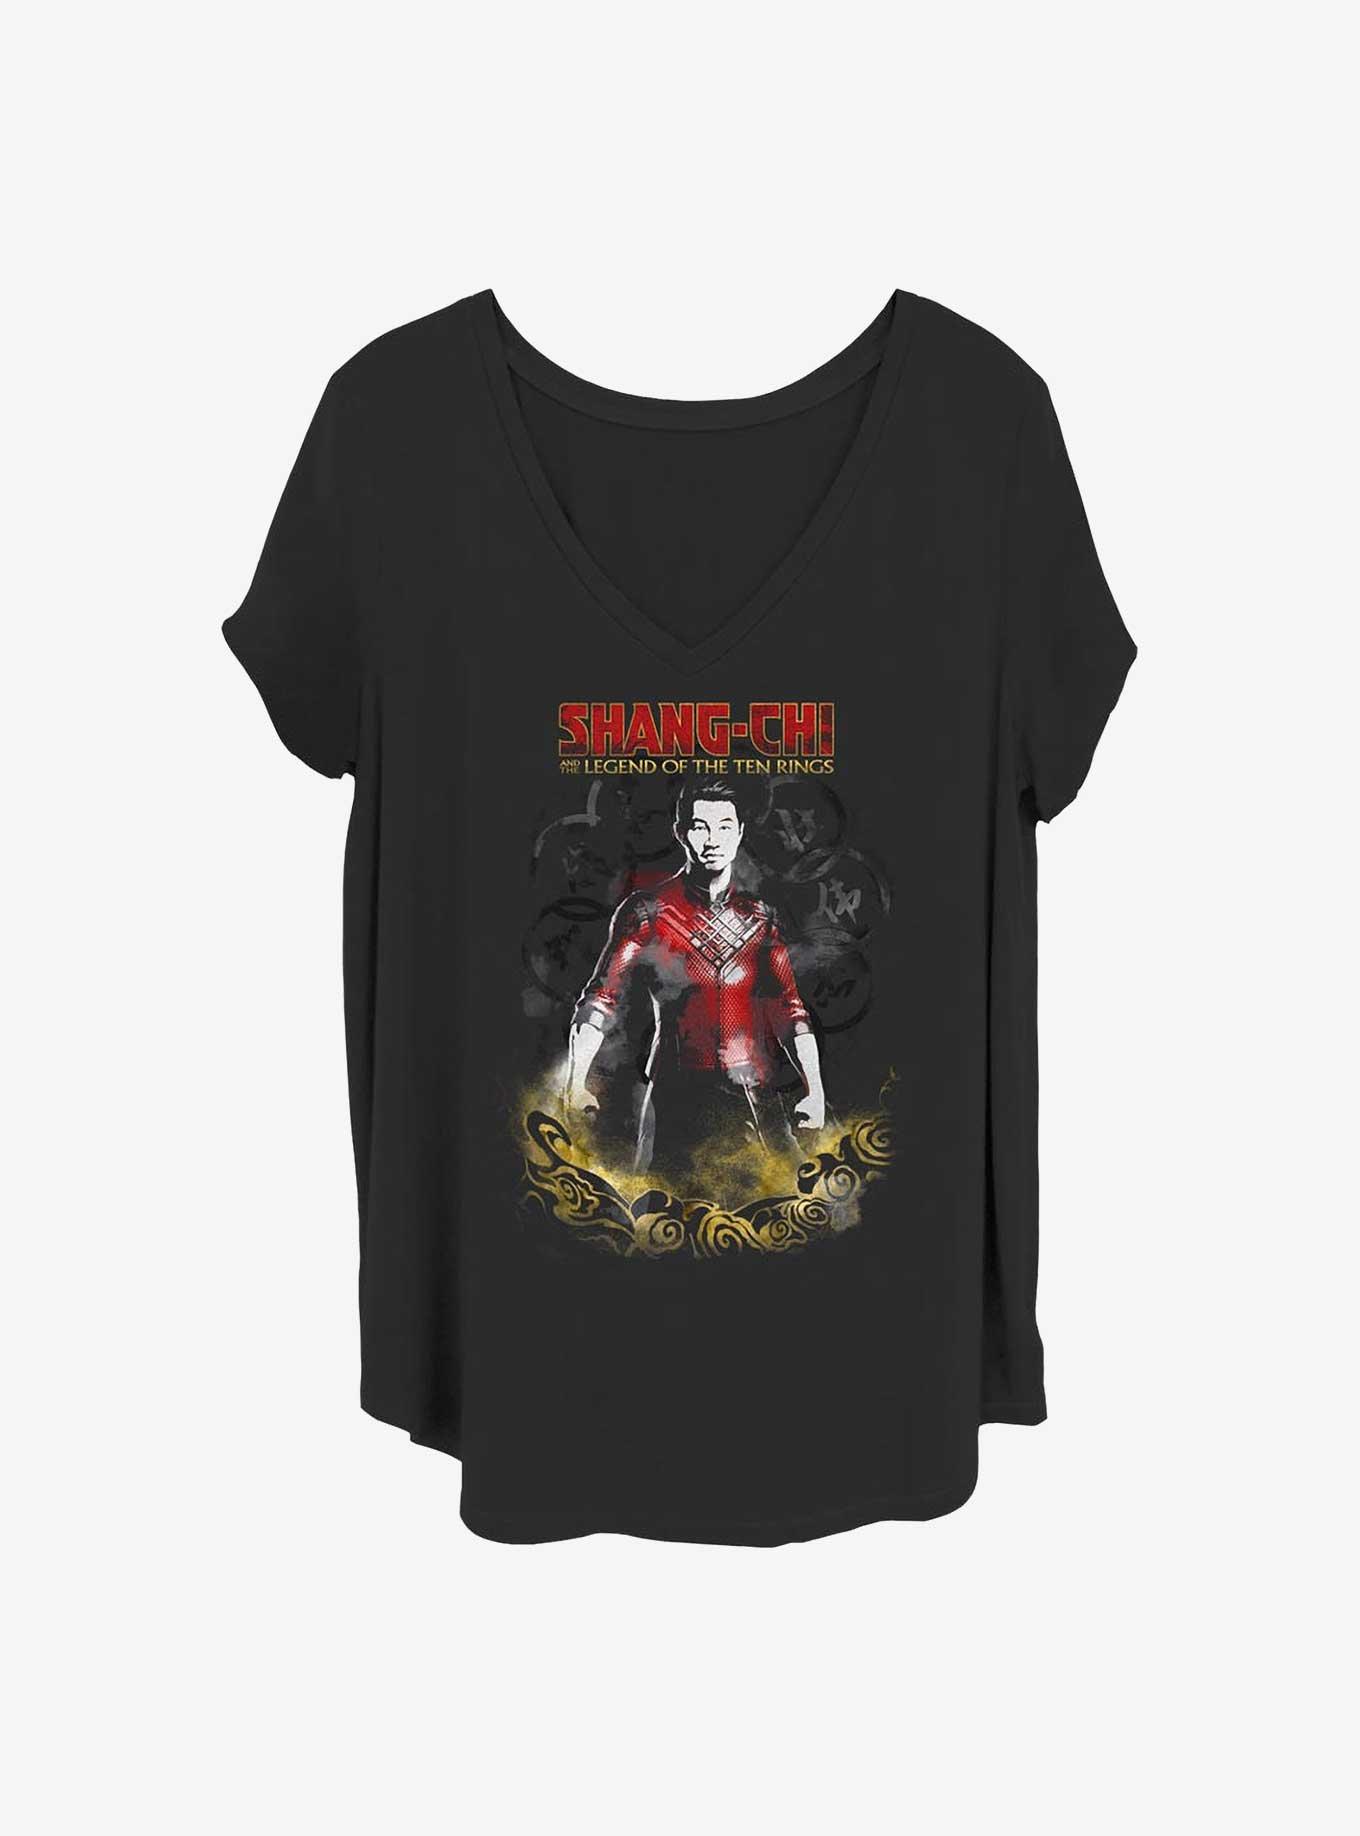 Marvel Shang-Chi and the Legend of the Ten Rings Overlay Girls T-Shirt Plus Size, BLACK, hi-res